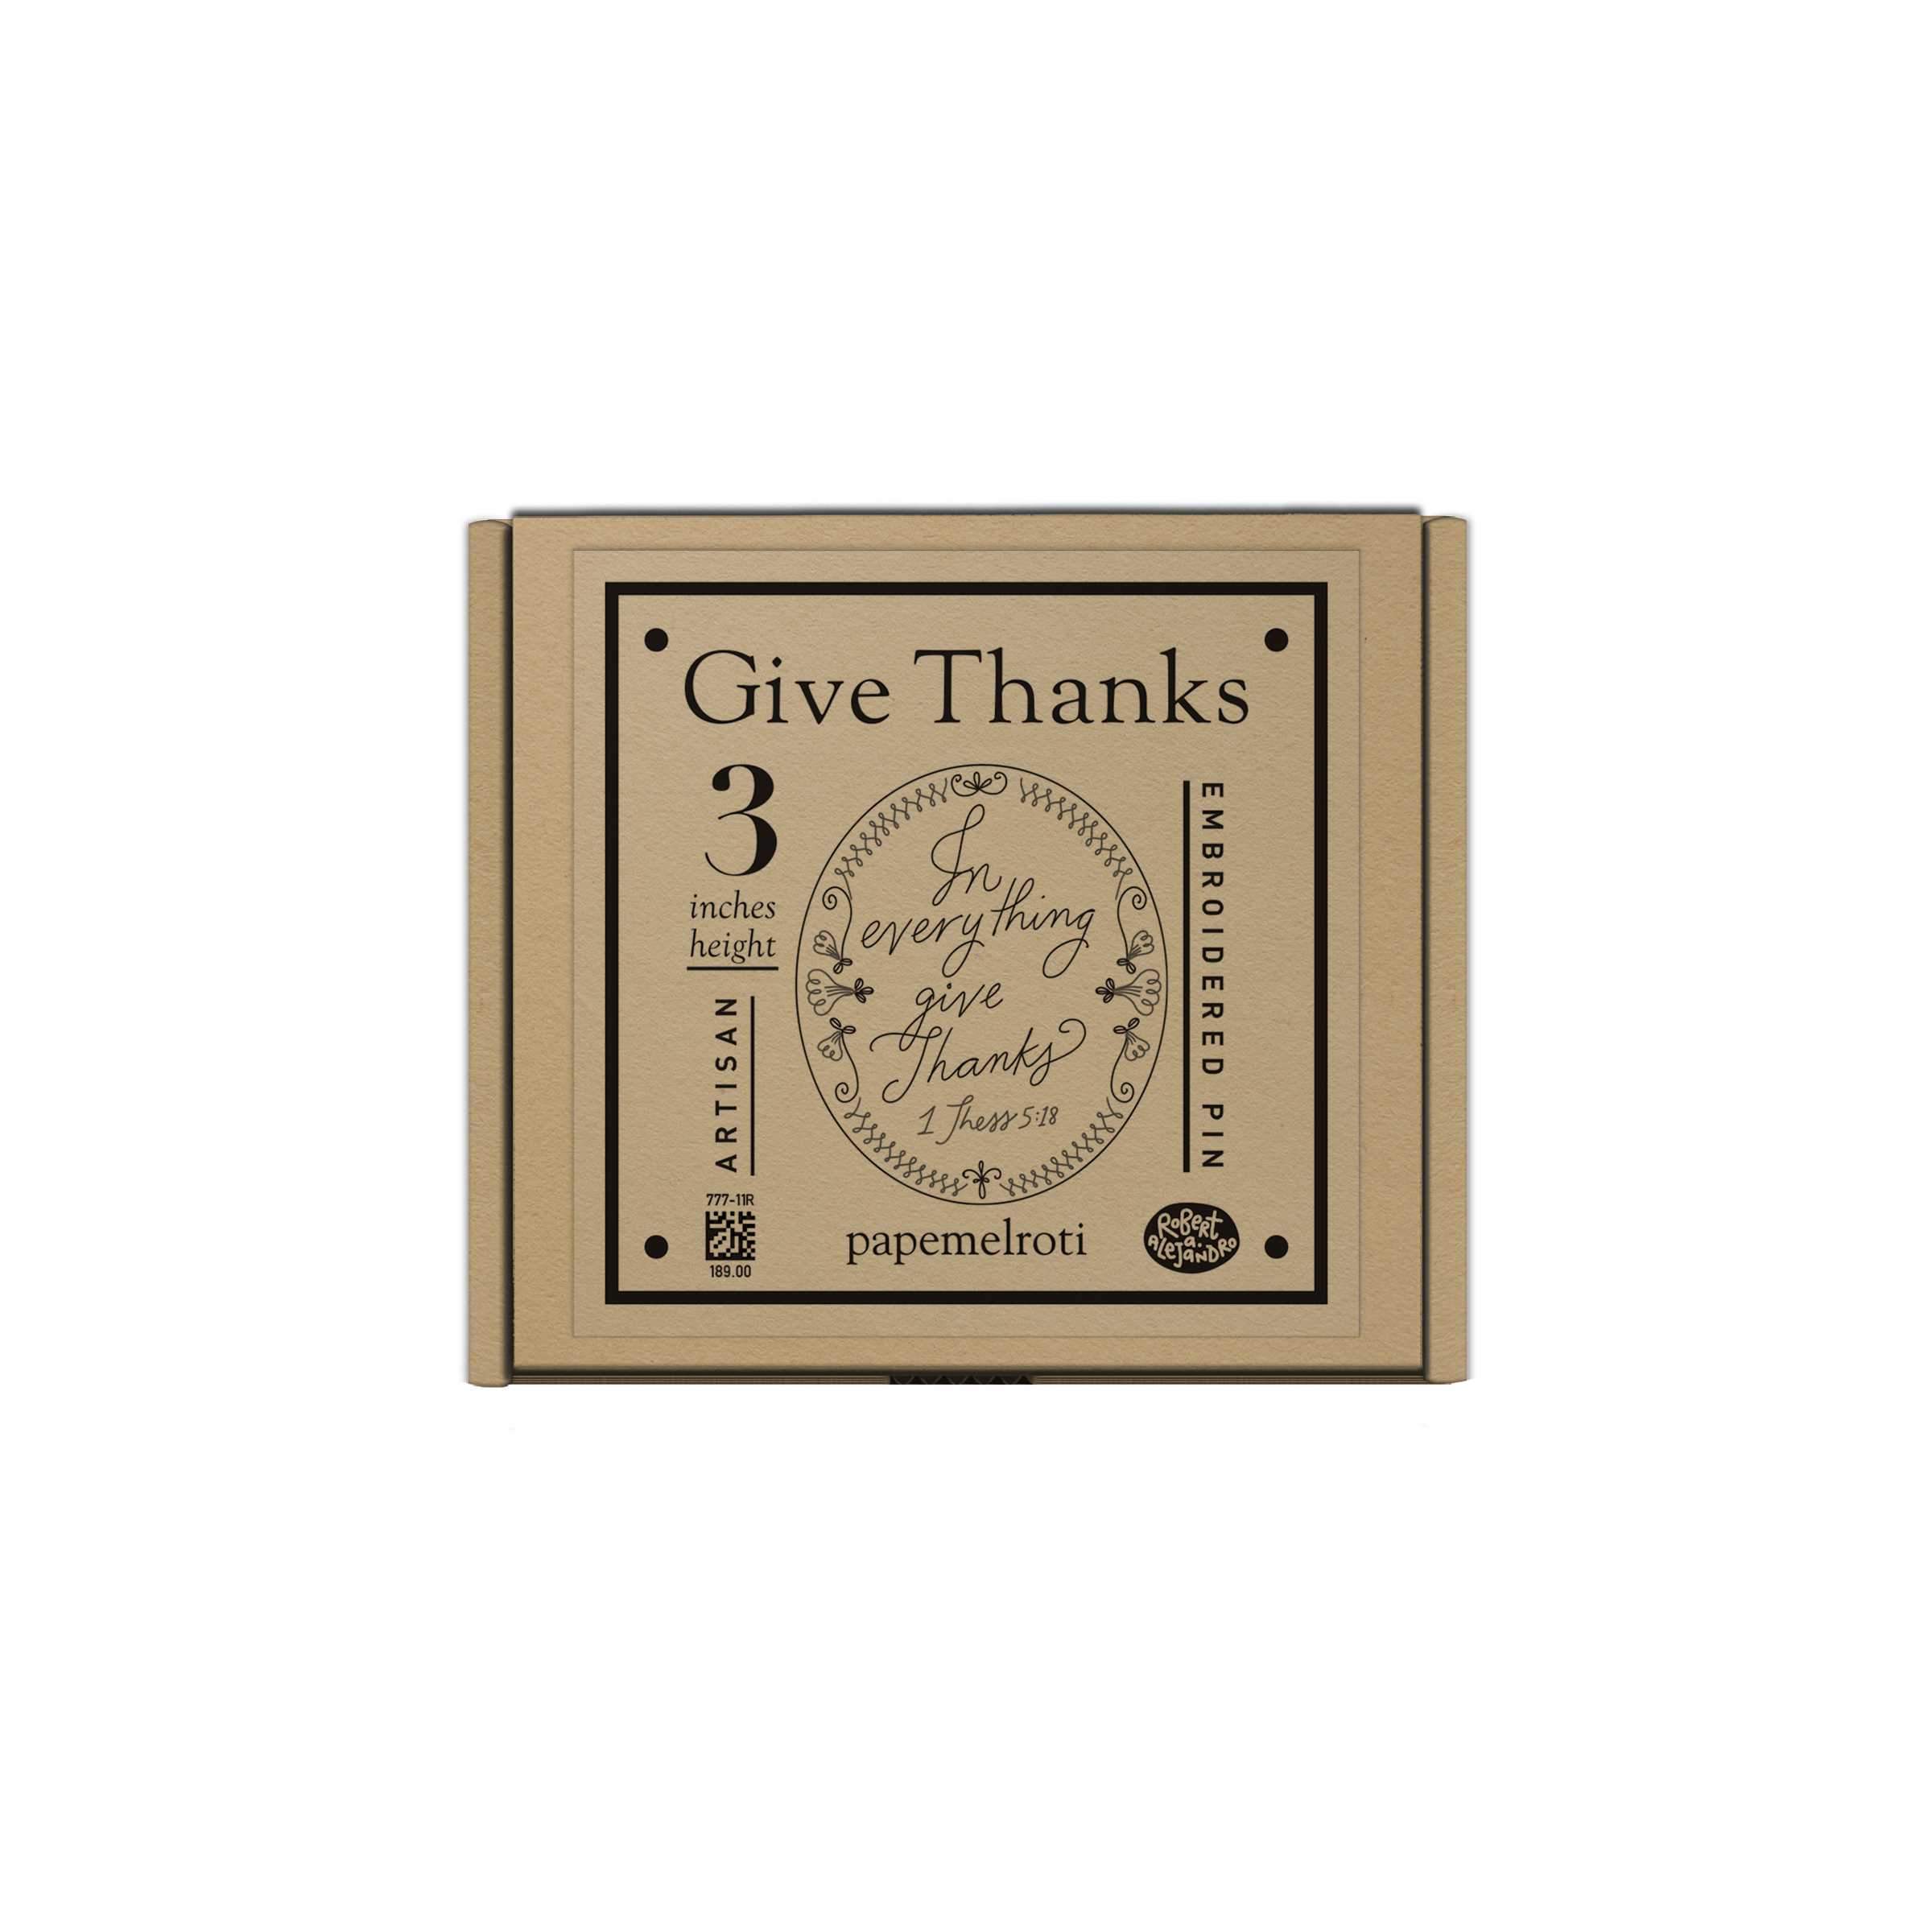 In Everything Give Thanks Artisan Embroidered Pin